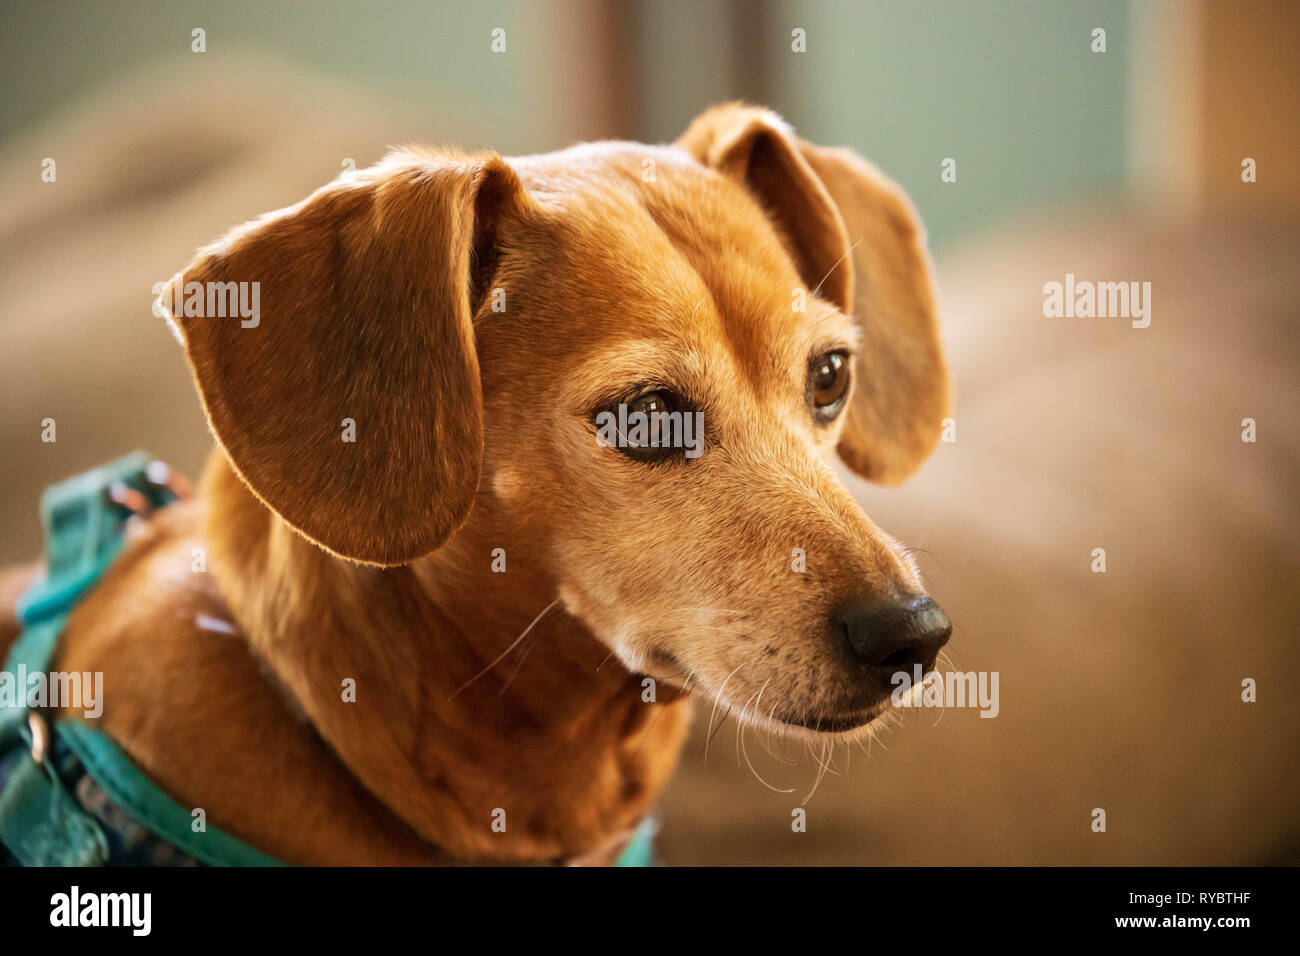 Cute dachshund looks intently at object of interest Stock Photo